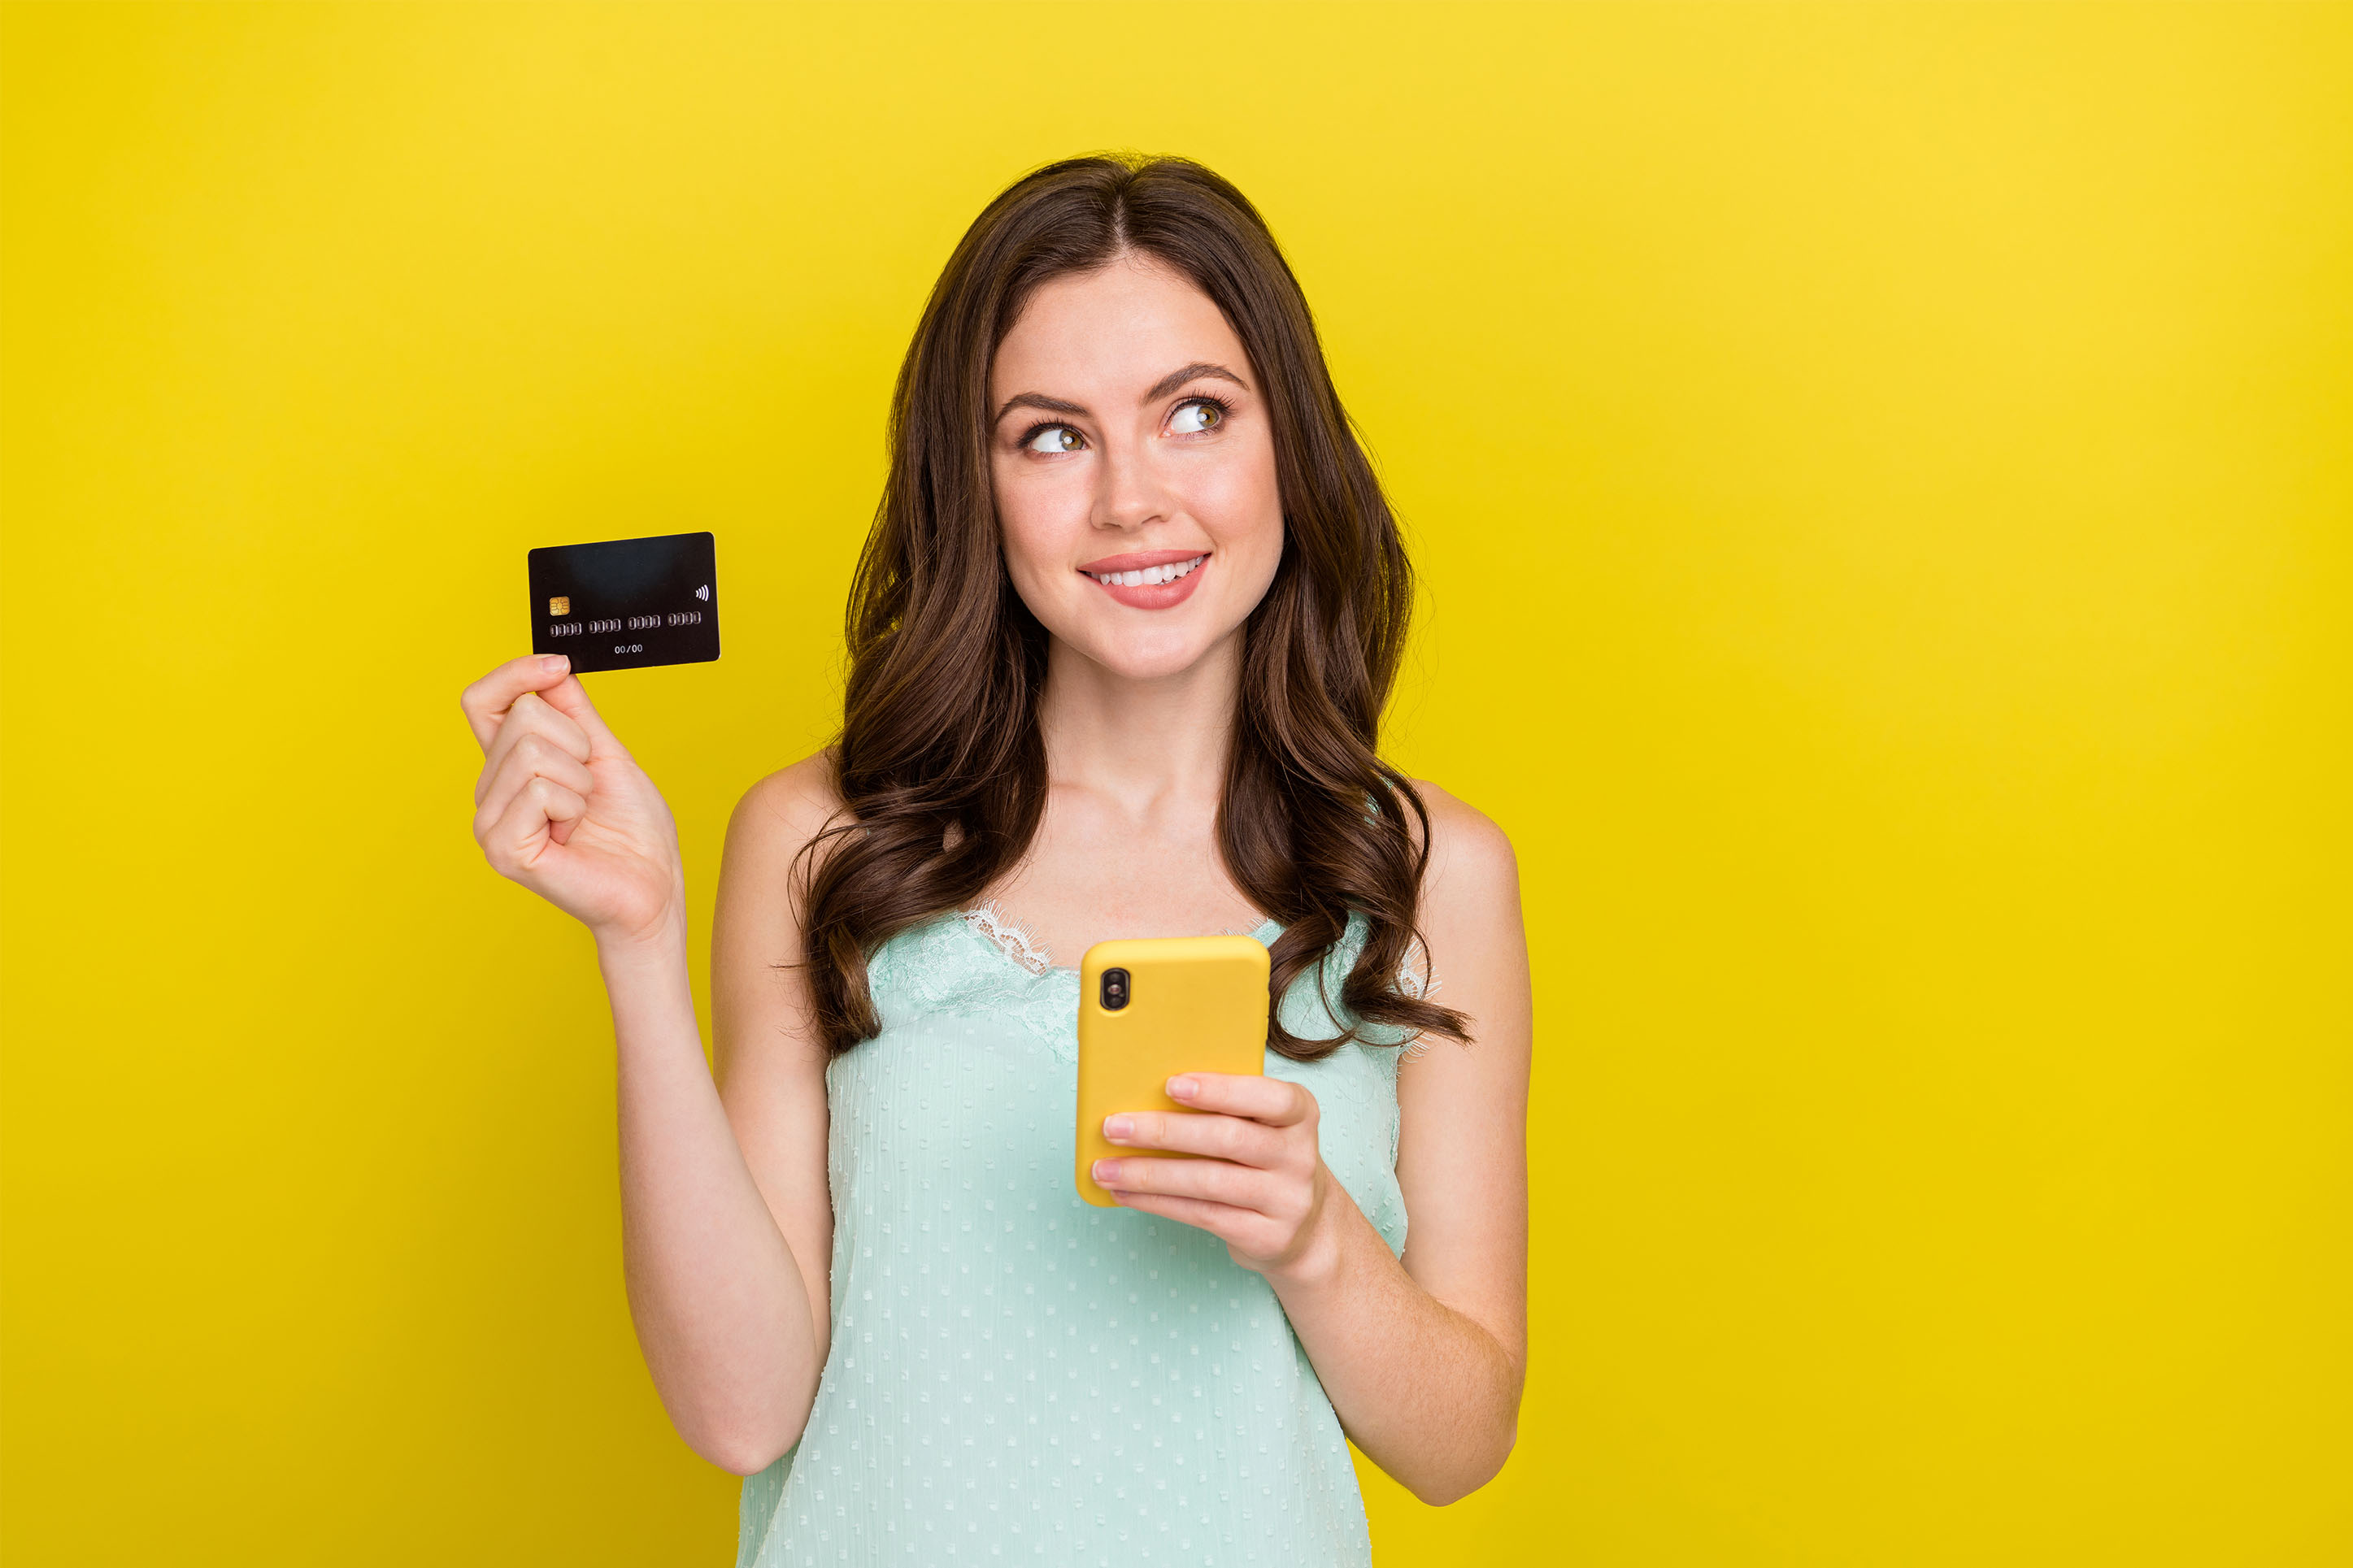 Woman with her credit card and mobile phone, monitoring her credit. 